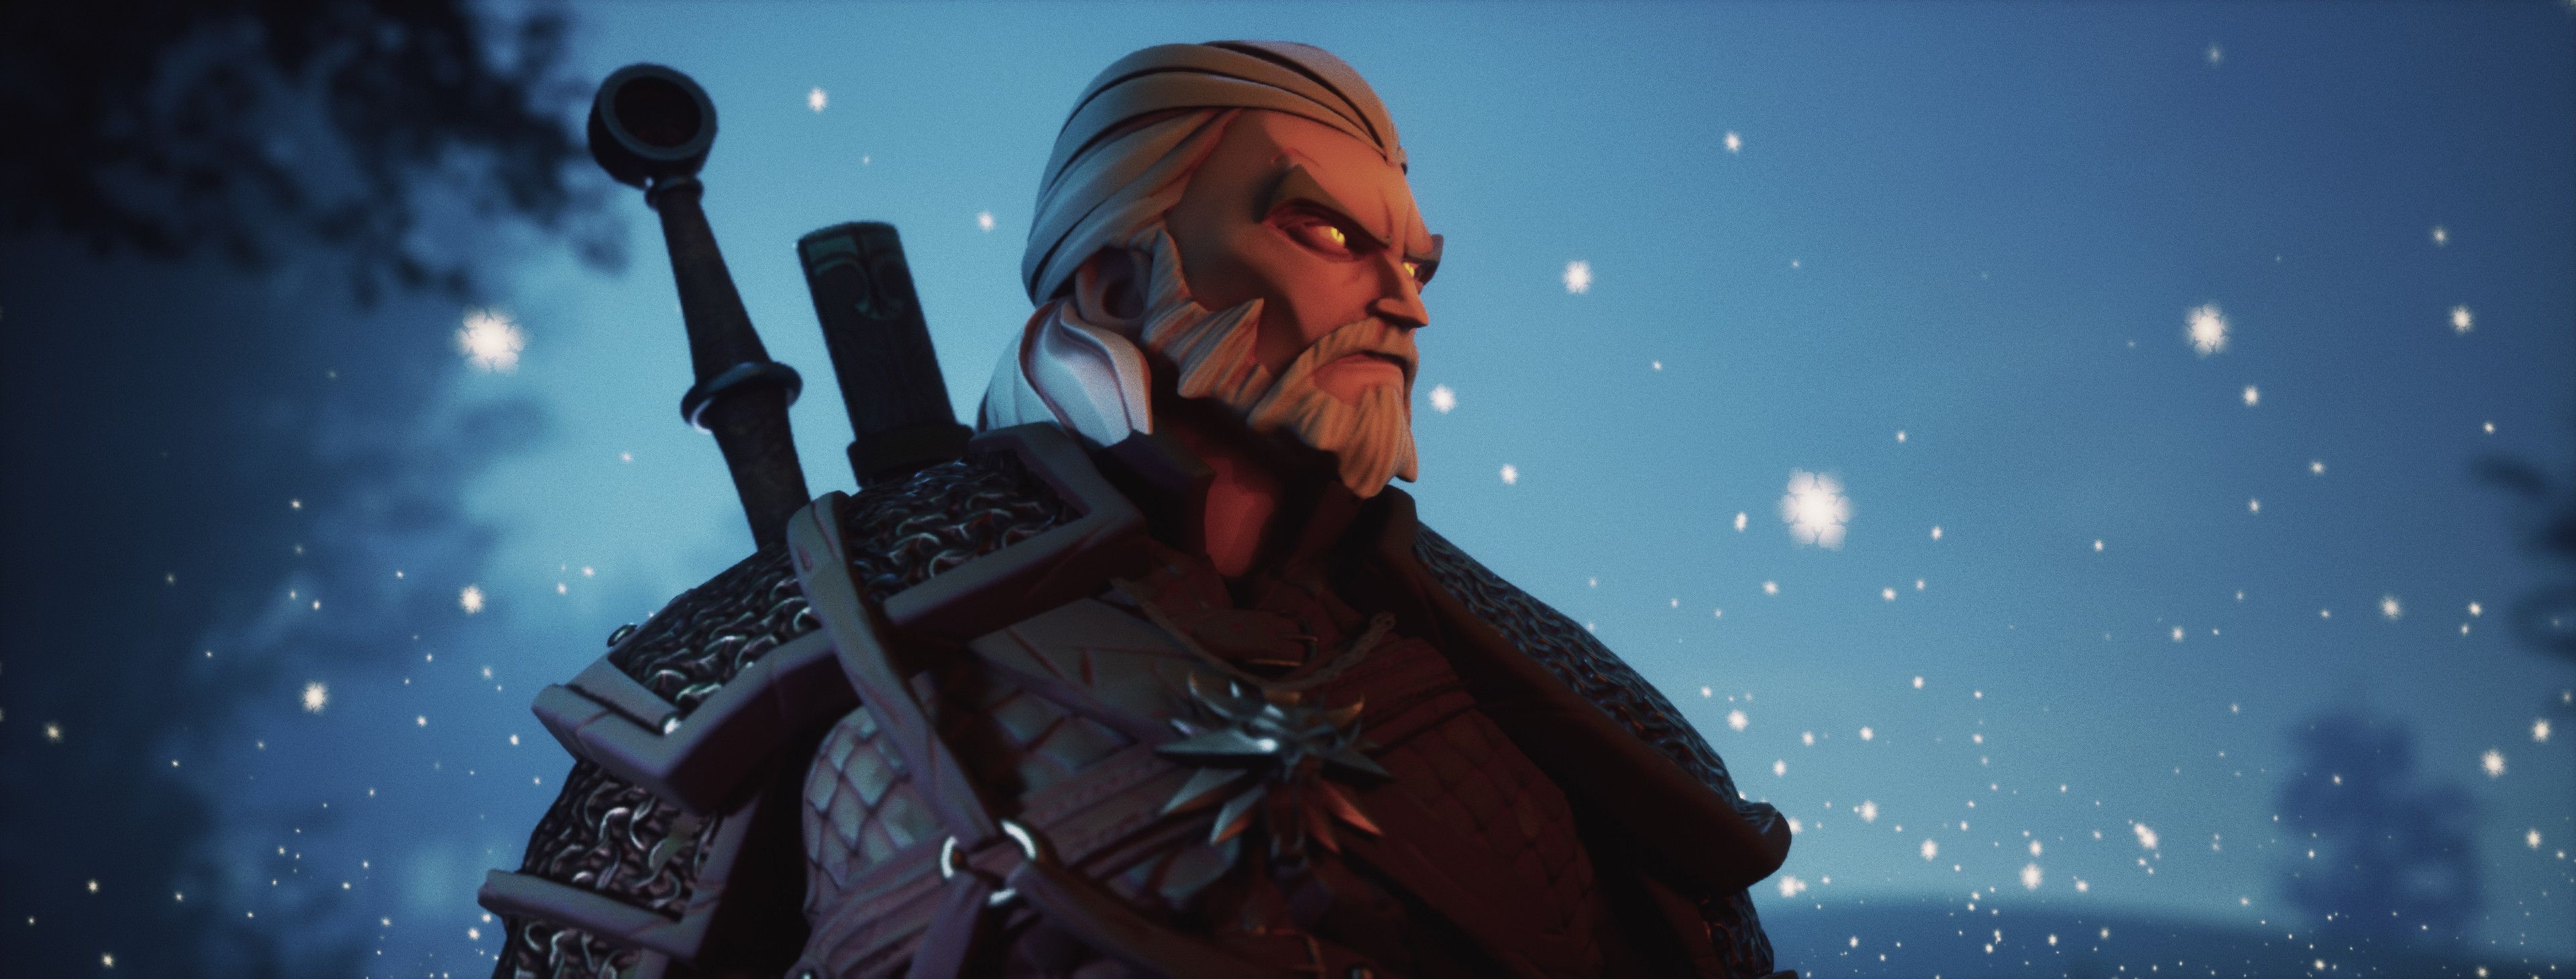 General 3840x1460 Michele Marchionni snow ultrawide snowflakes The Witcher 3: Wild Hunt digital art The Witcher fan art sword Geralt of Rivia CGI video game characters CD Projekt RED ArtStation